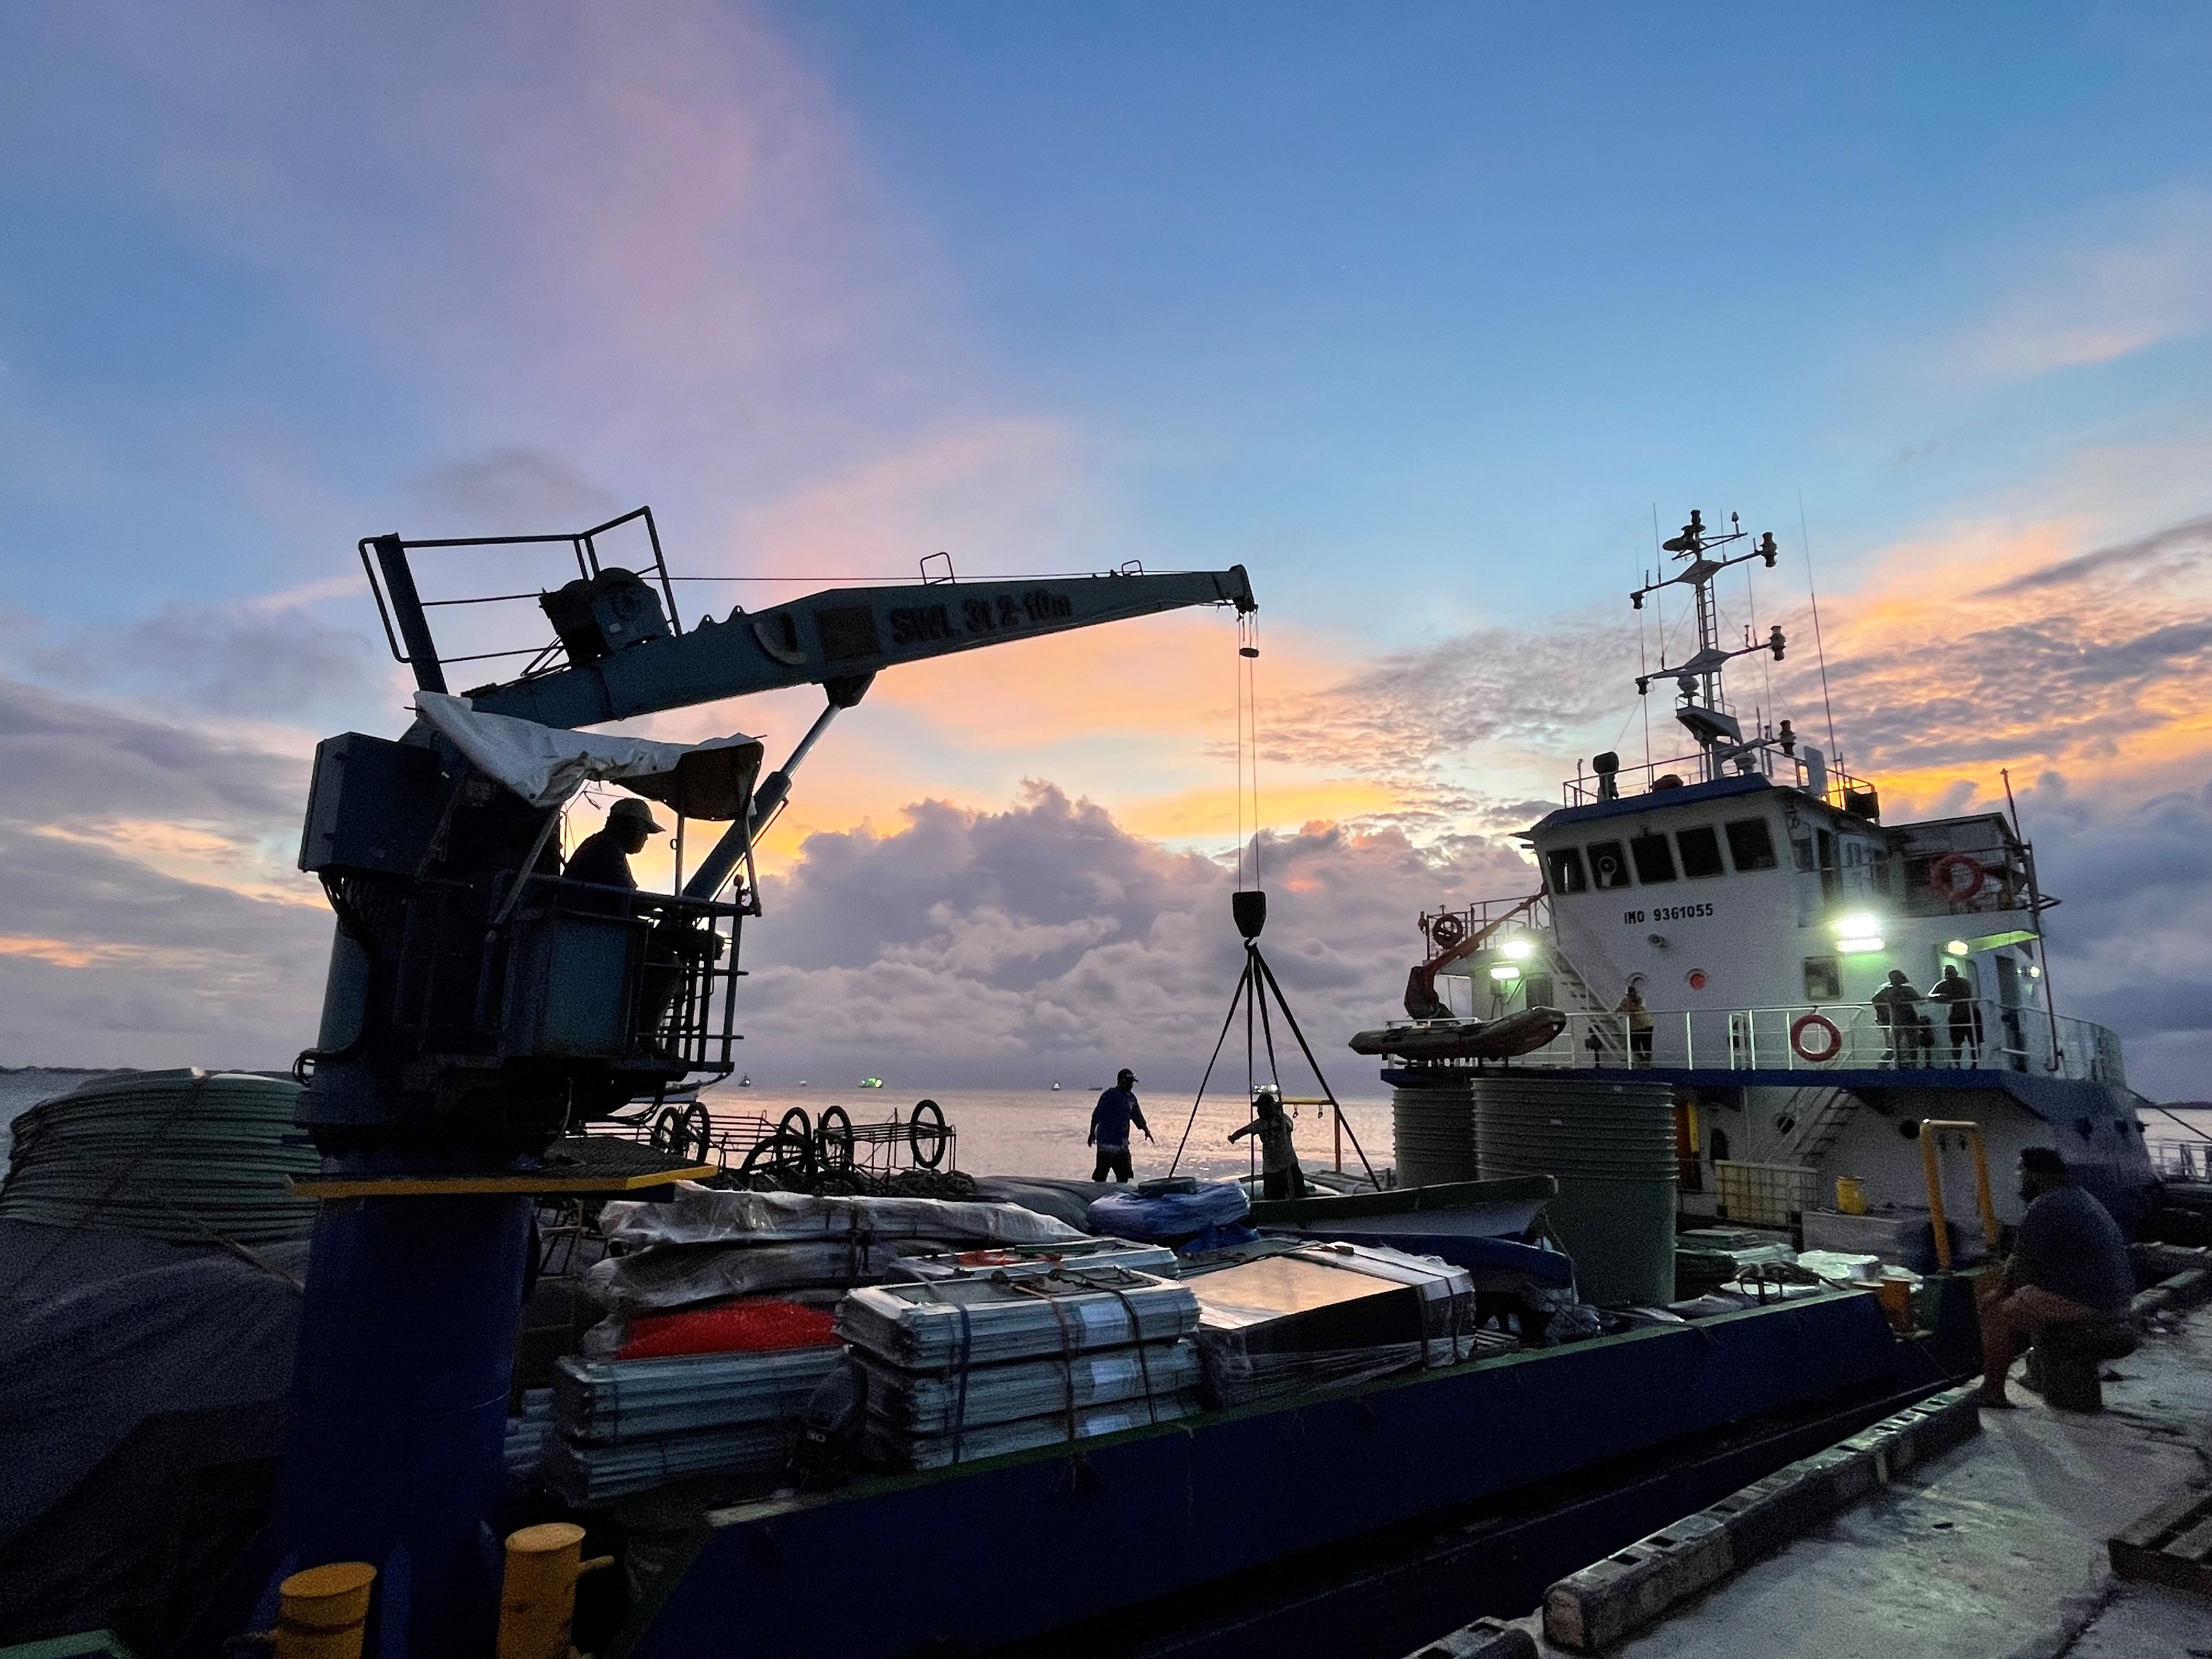 Loading operations in place at Uliga dock in Majuro